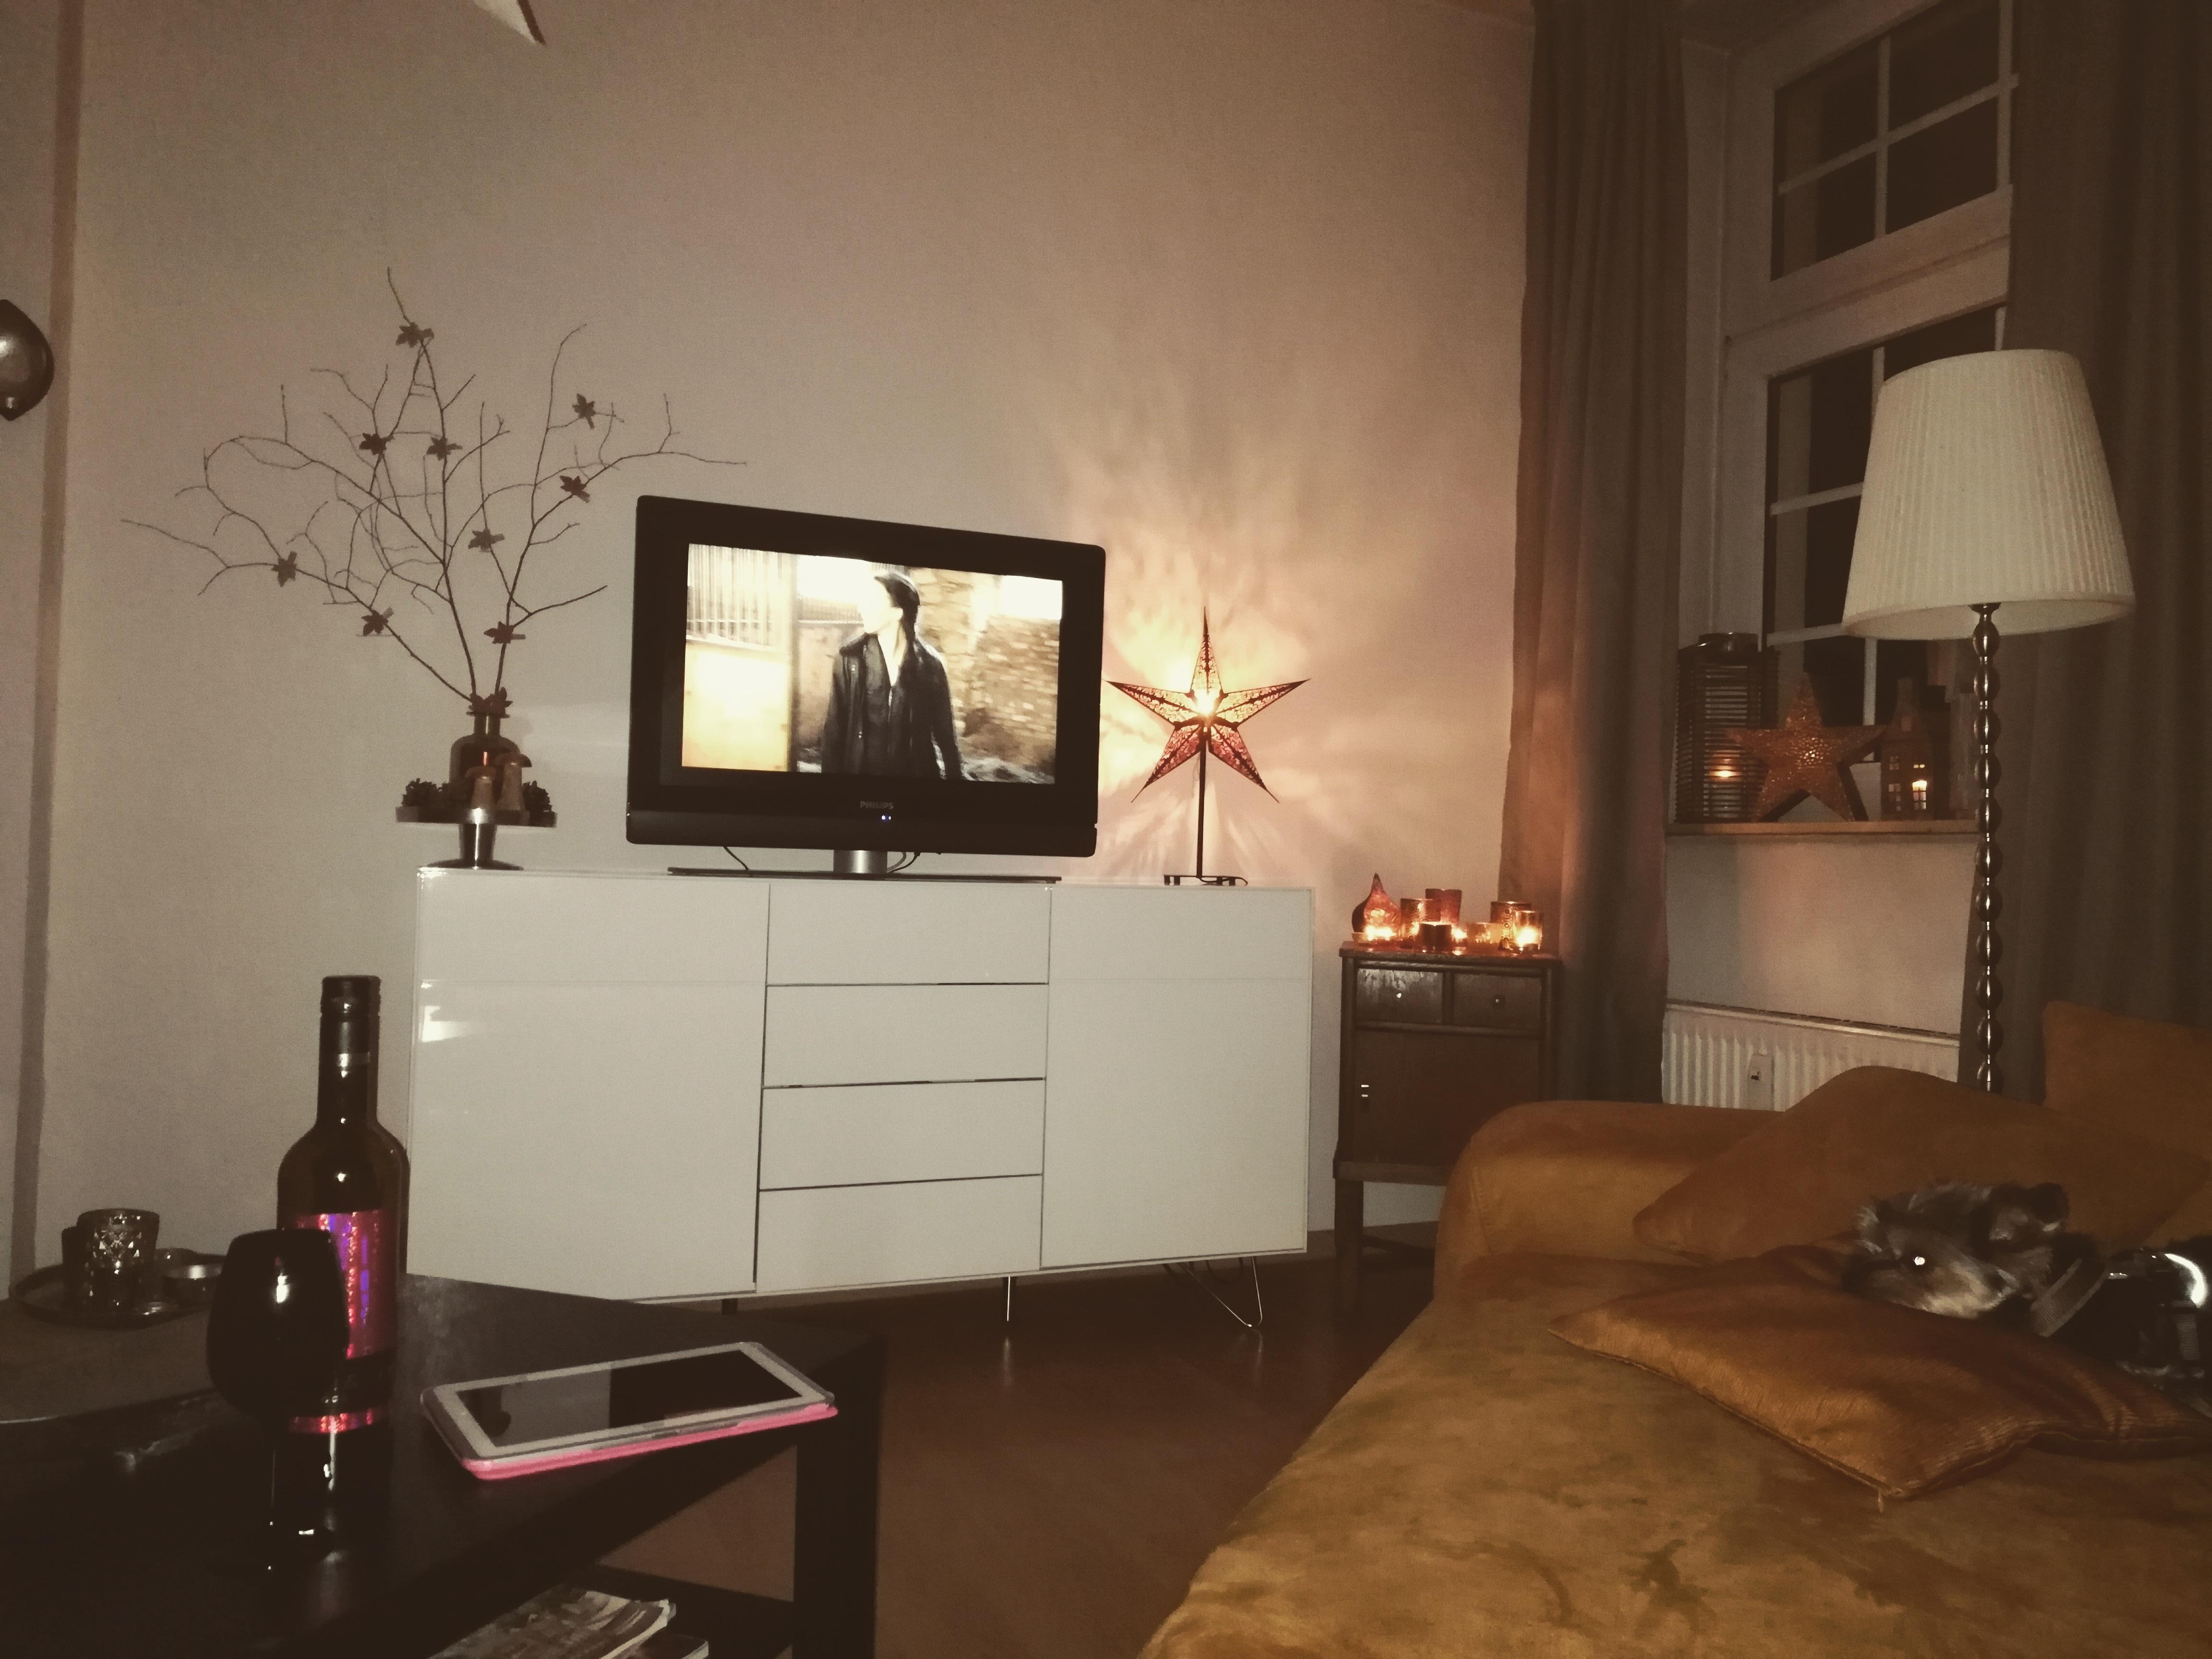 #home #cozytime #candlelight #HERBST 